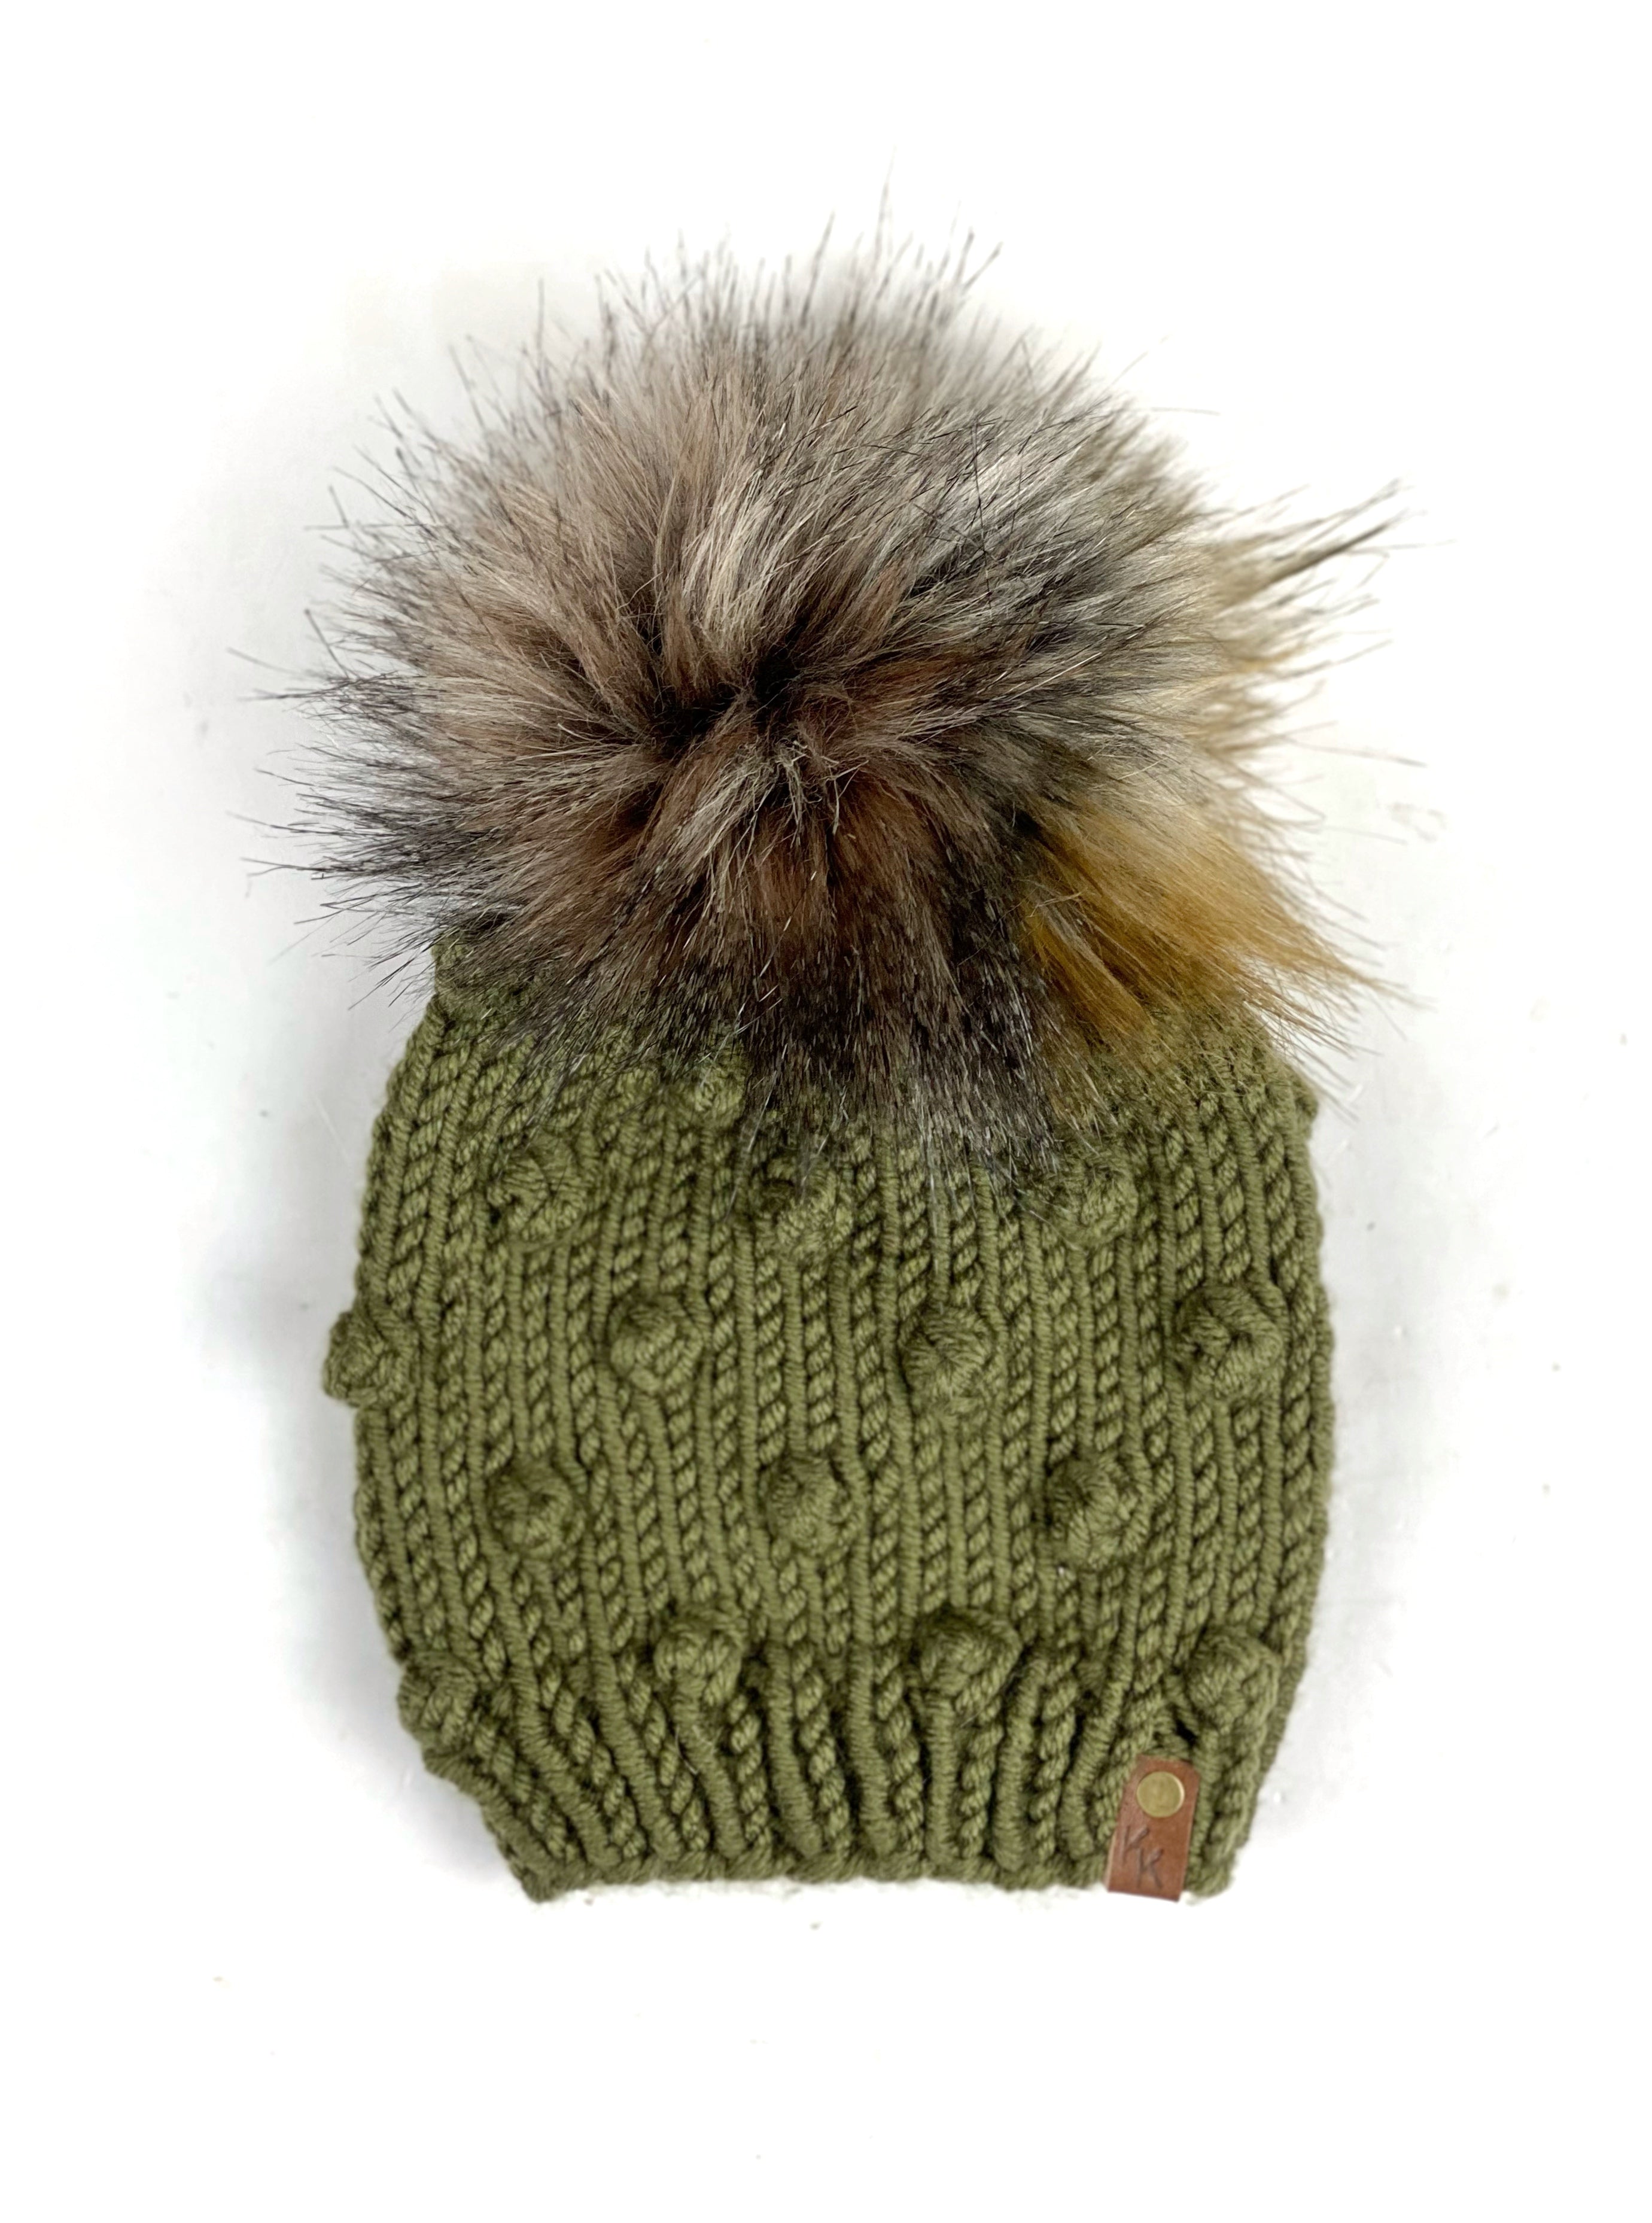 Child Size Bobble Beanie Hand Knit Hat Wool Blend Faux Fur Pom Ready to Ship